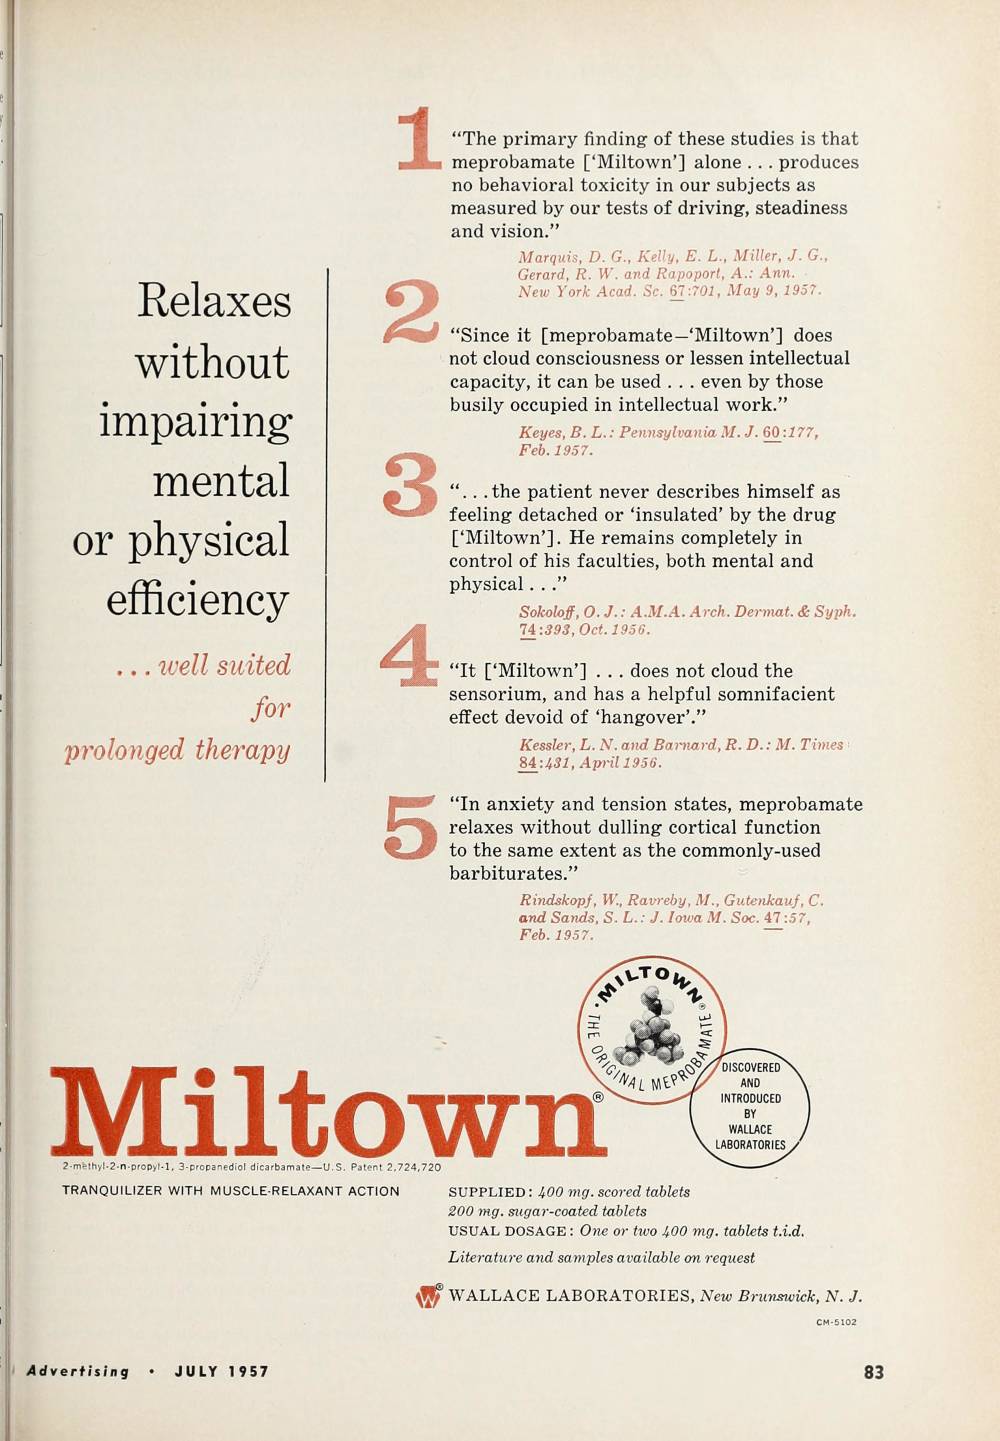  Wallace Laboratories, Miltown Ad, 1957 